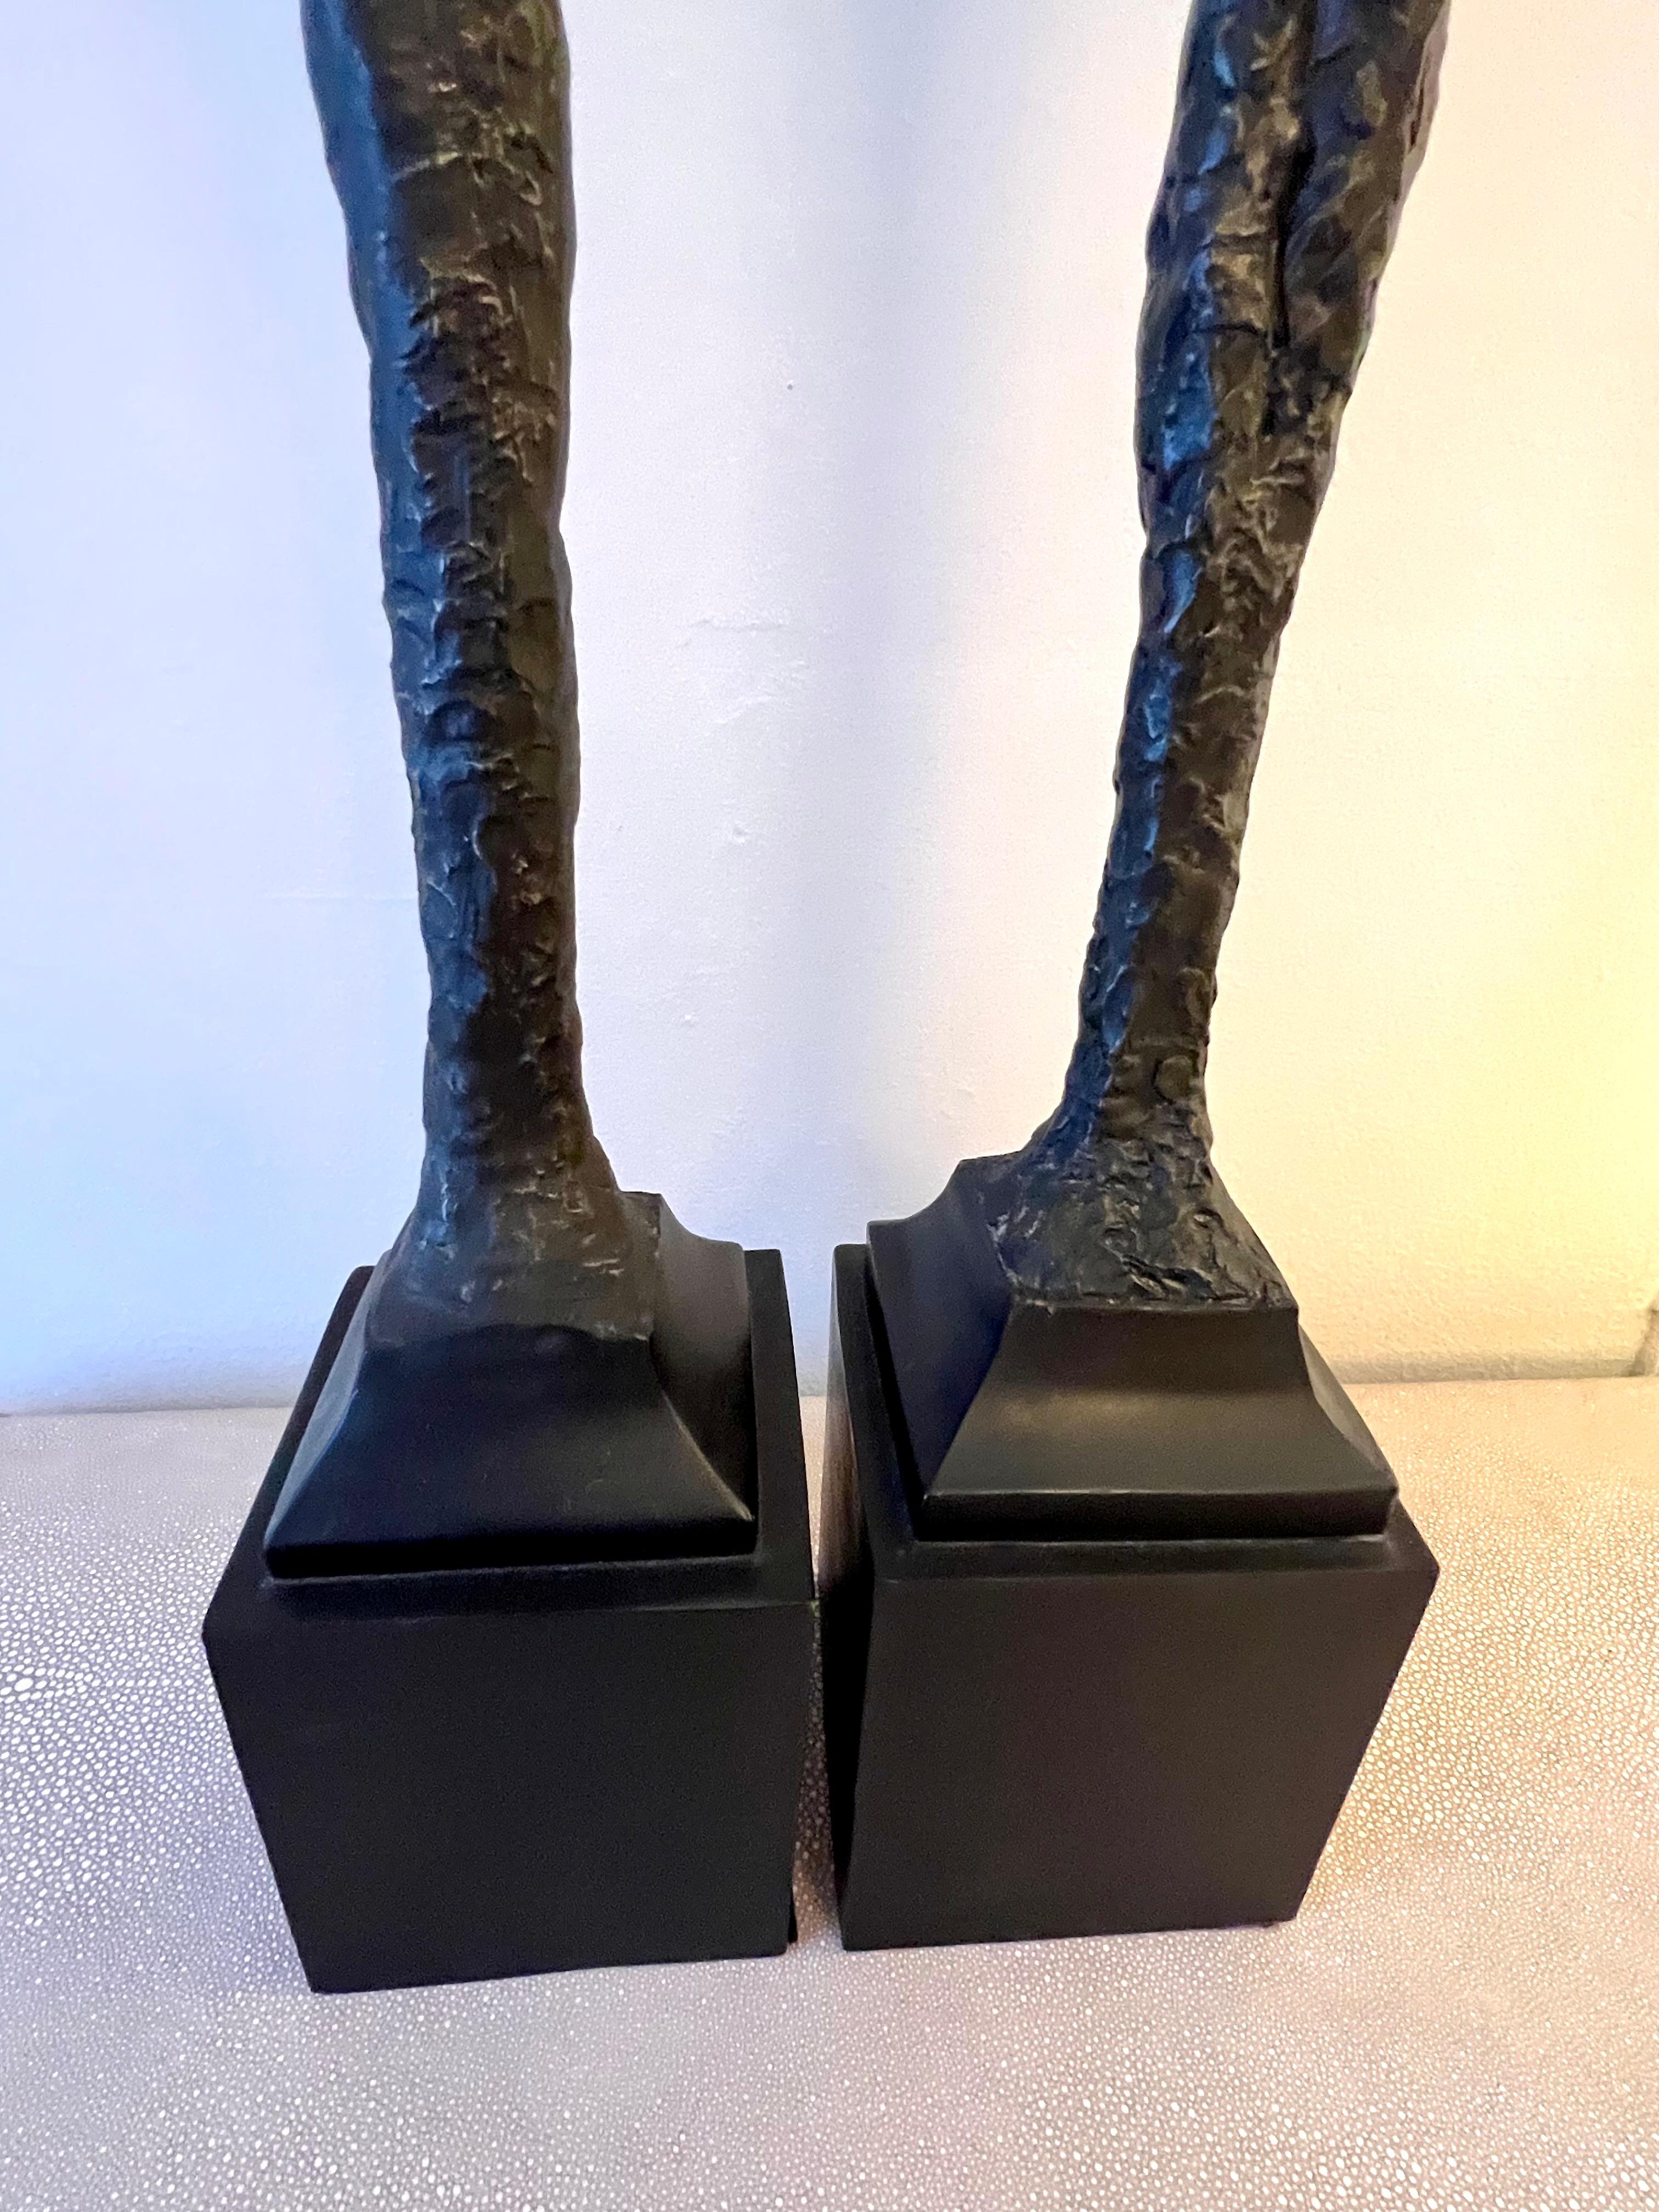 Pair of Figurative Statues in the Style of Giacometti 2